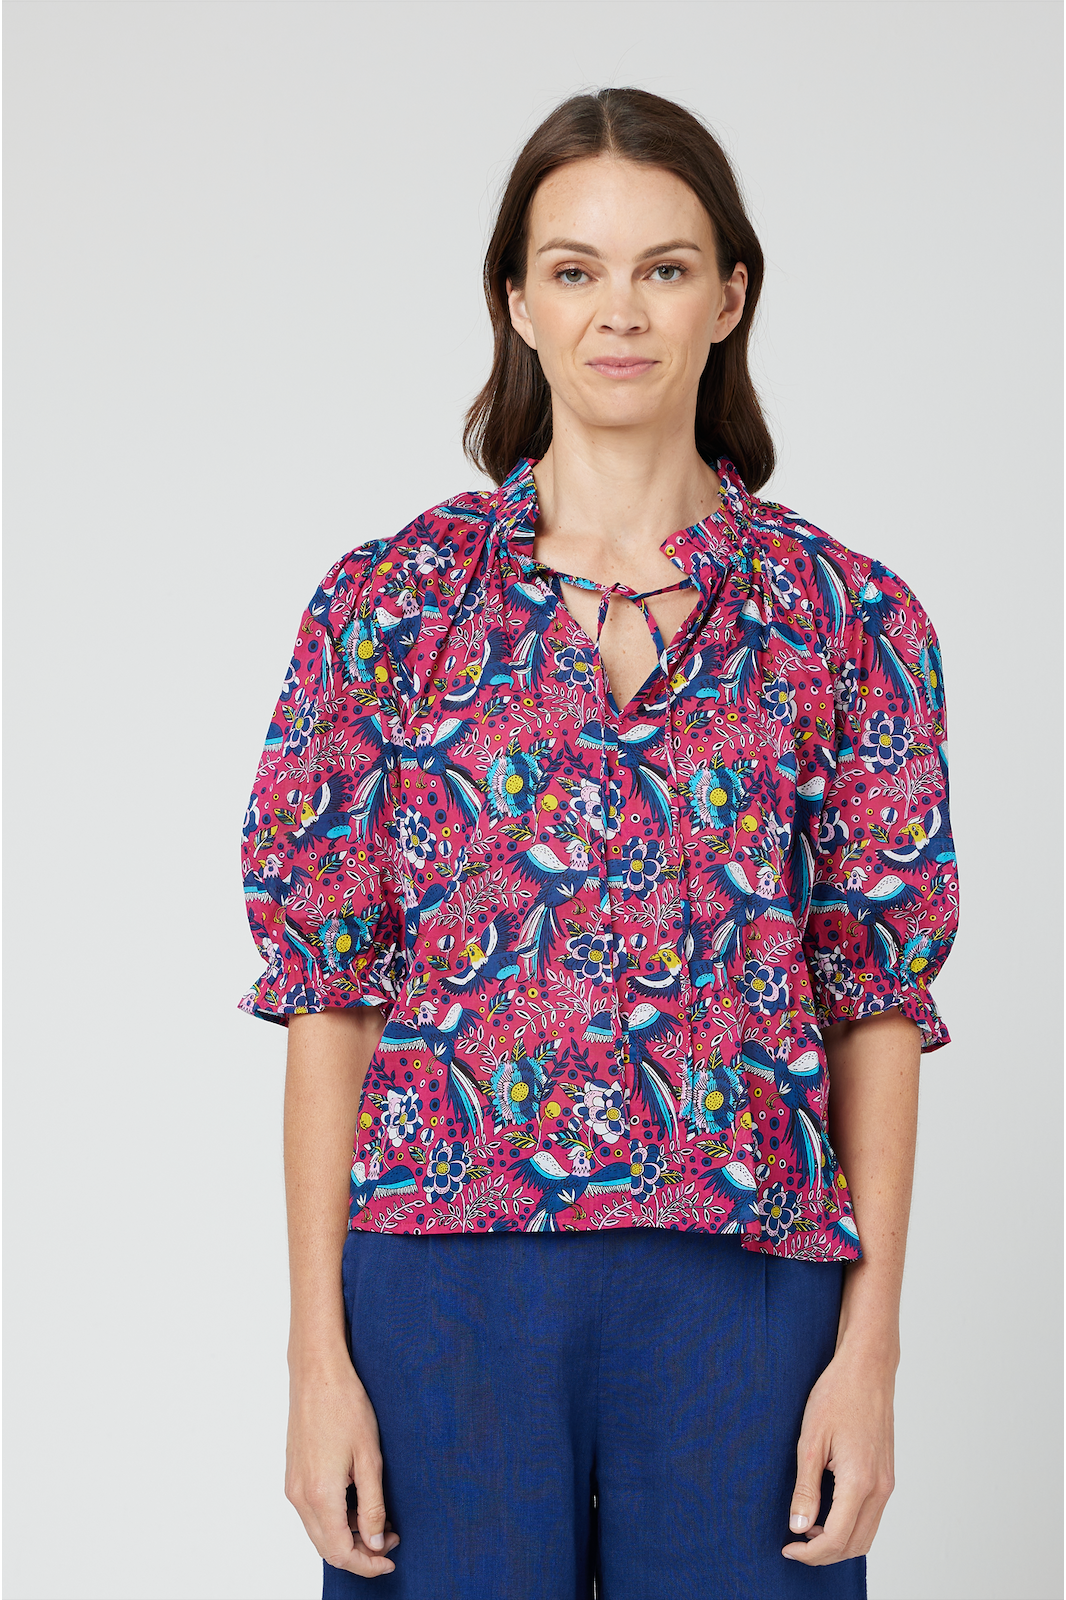 CAKE Tie Neck Blouse in Paradise